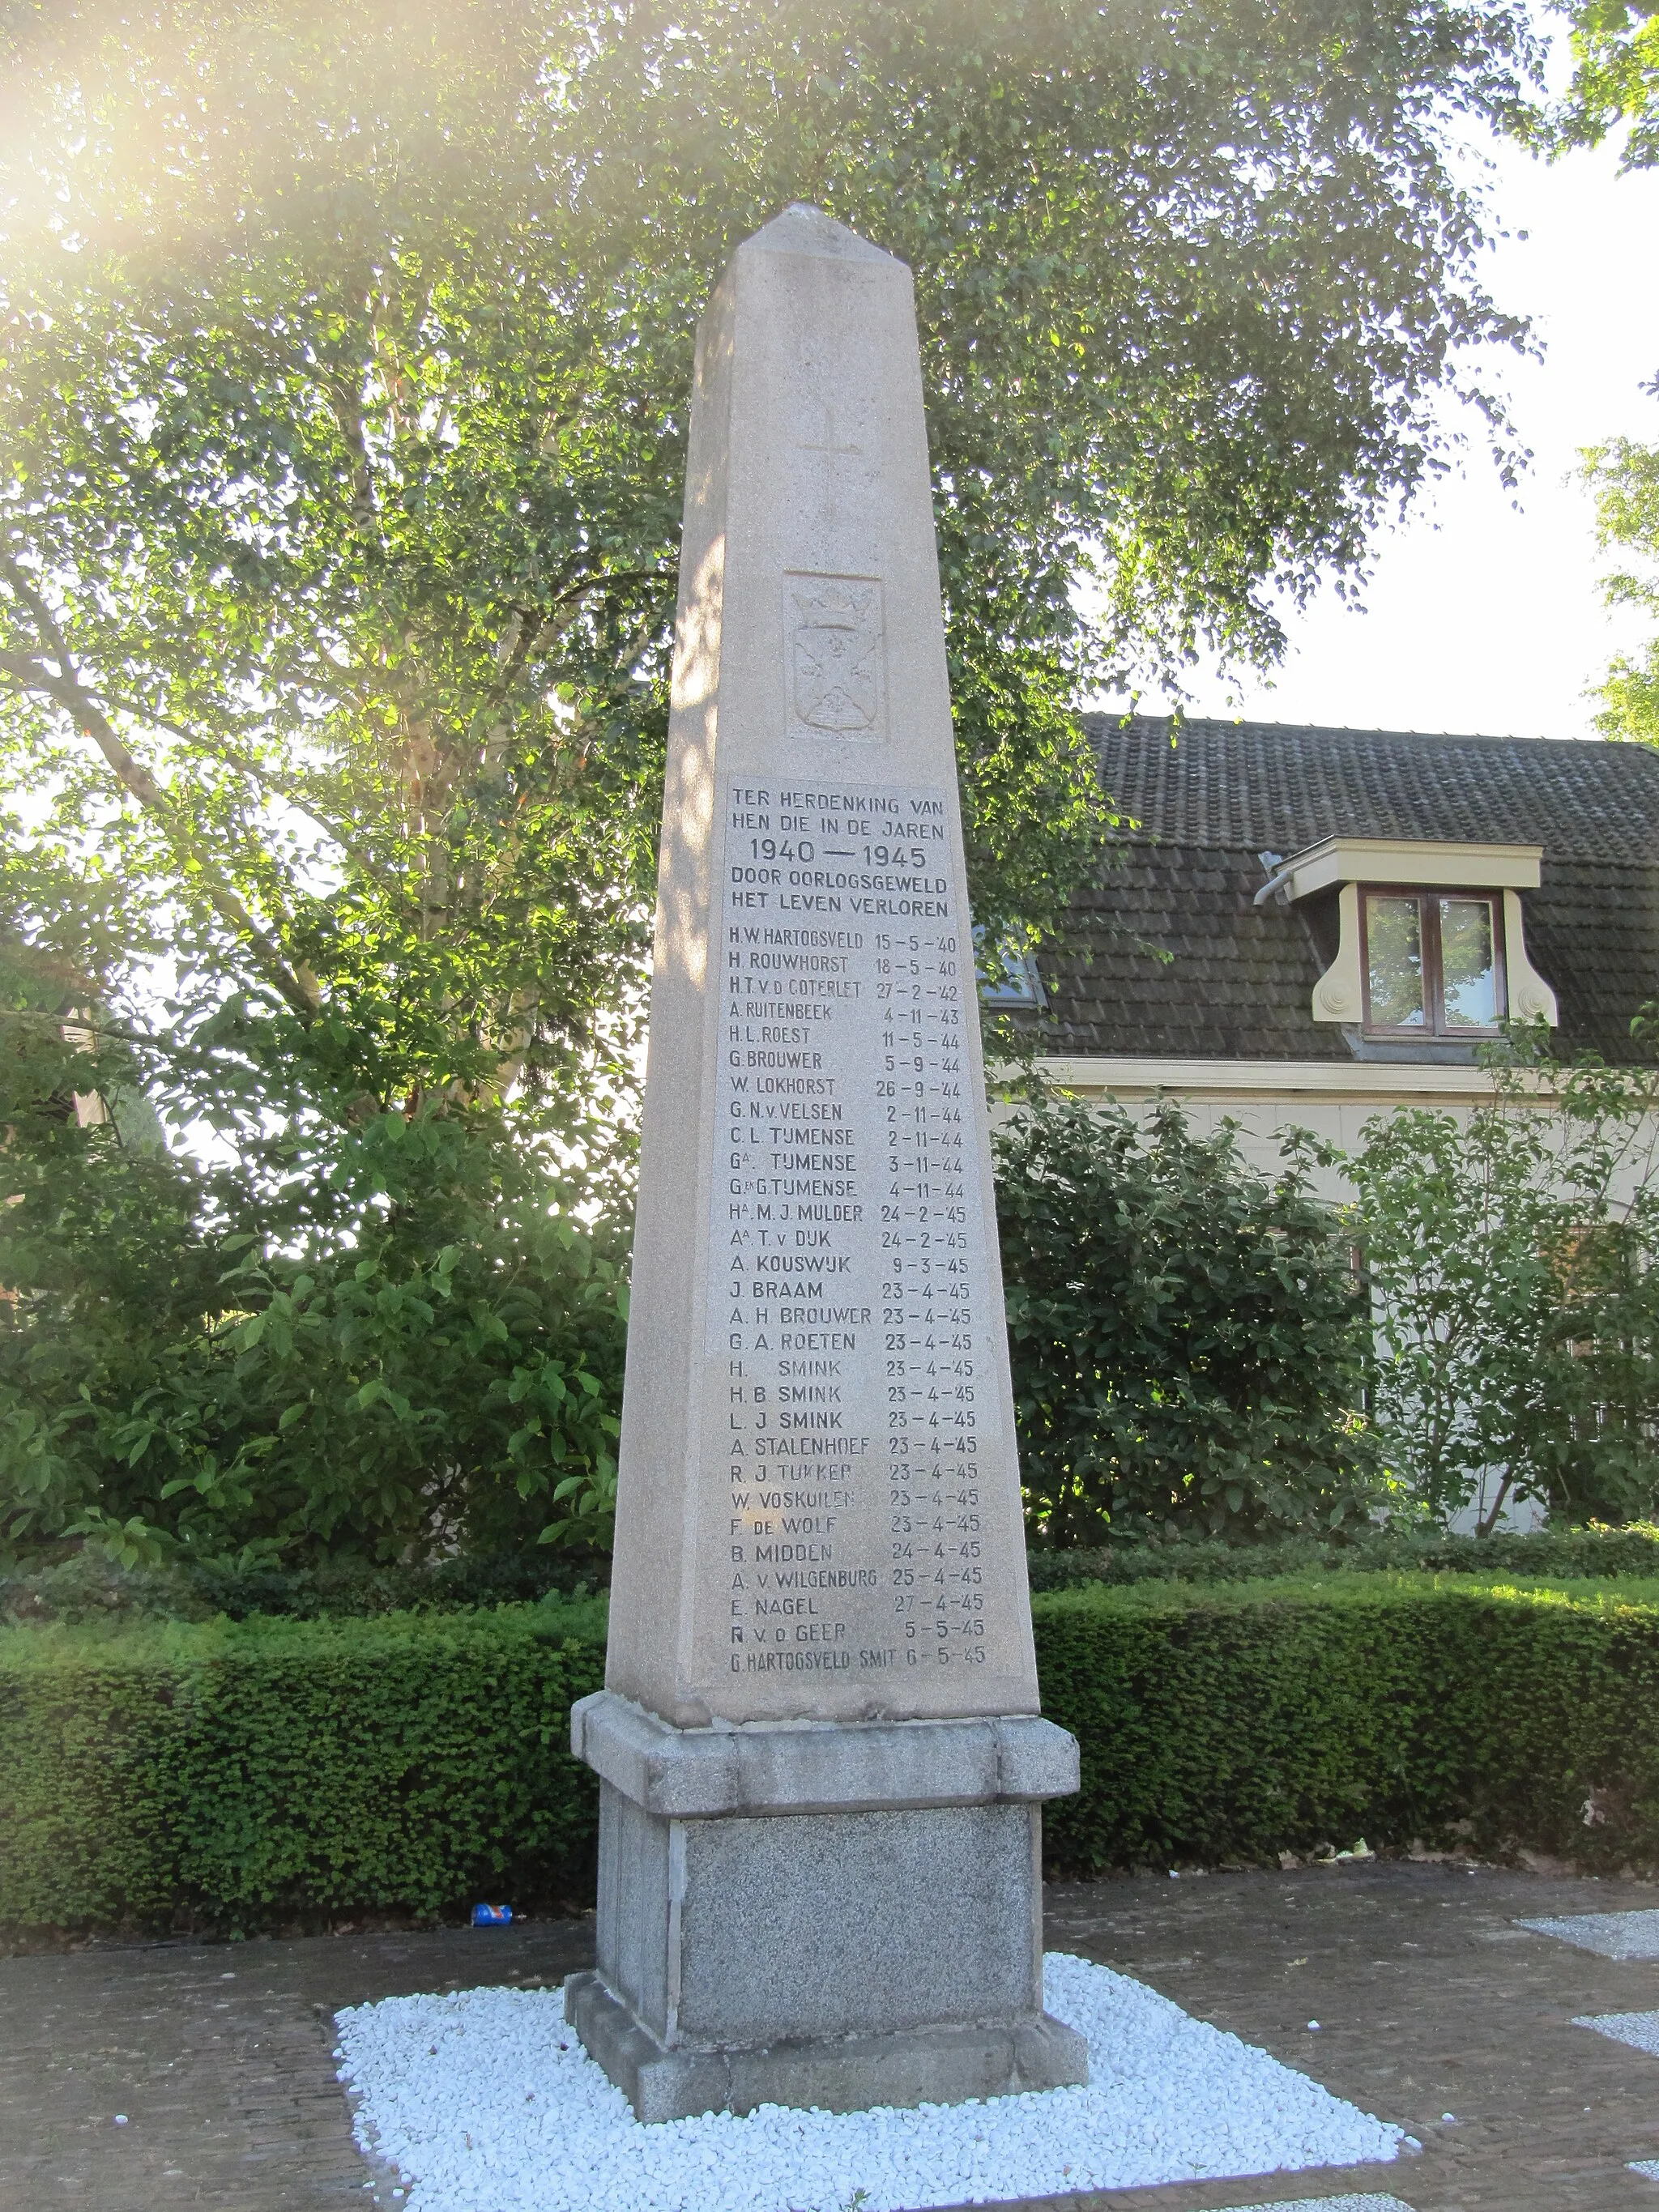 Photo showing: Memorial monument in Hoogland, municipality of Amersfoort, The Netherlands